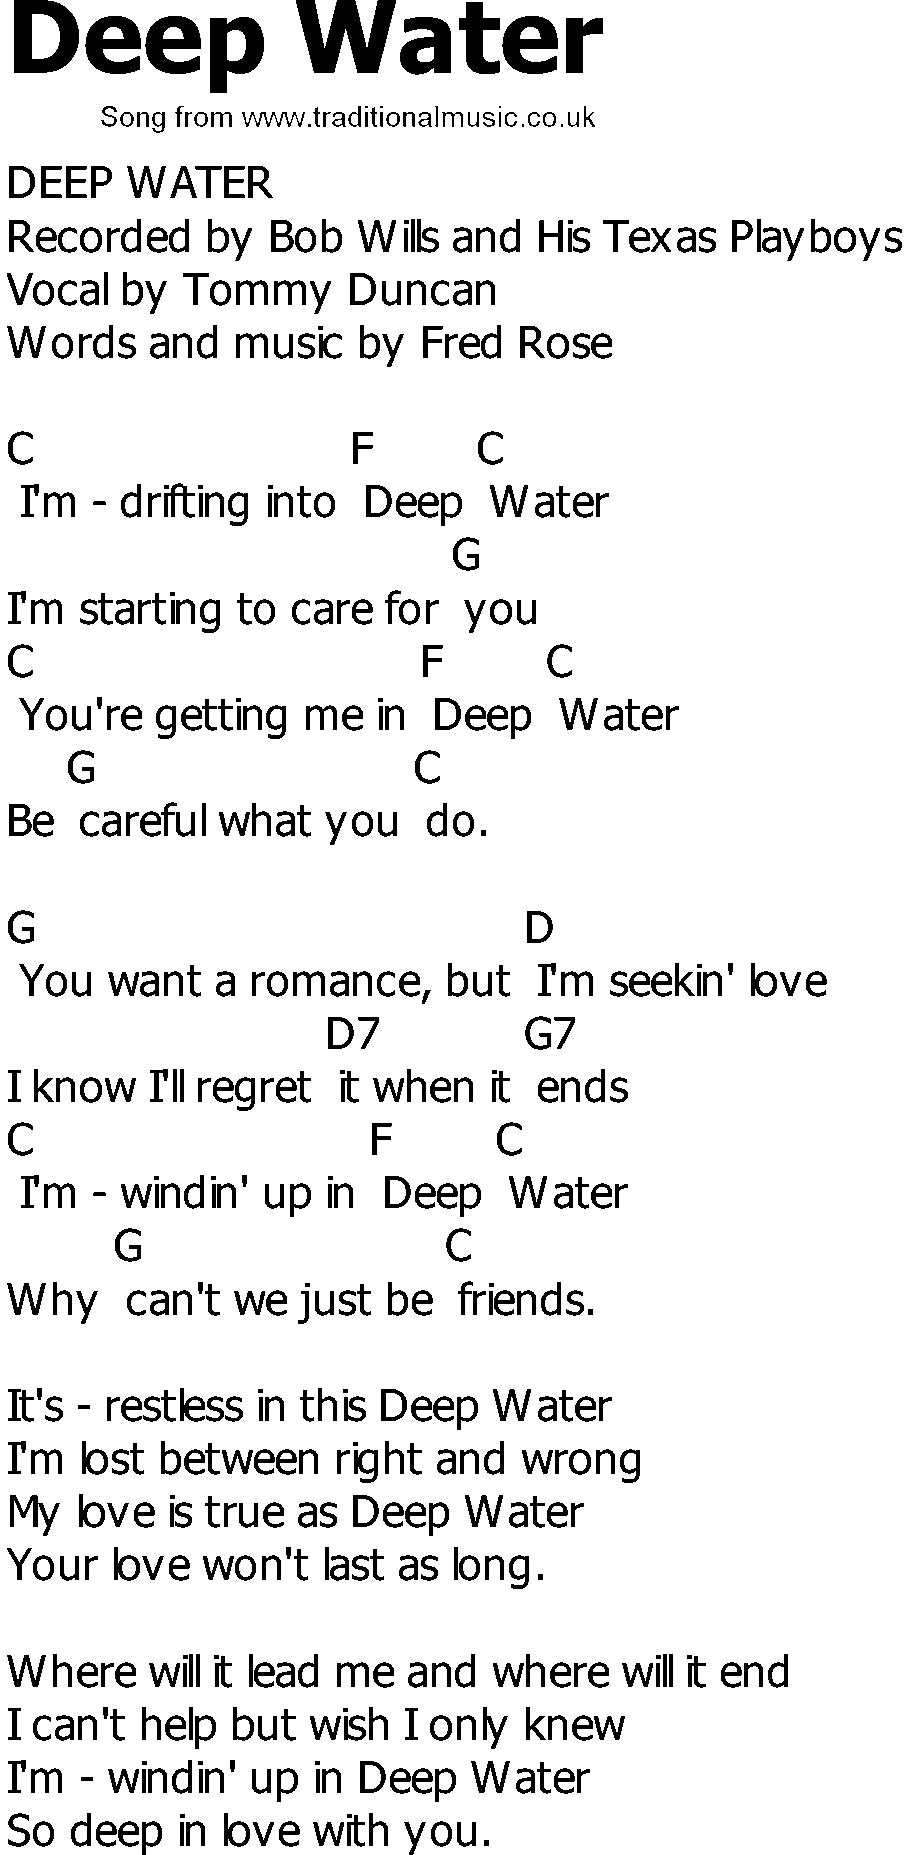 Old Country song lyrics with chords - Deep Water